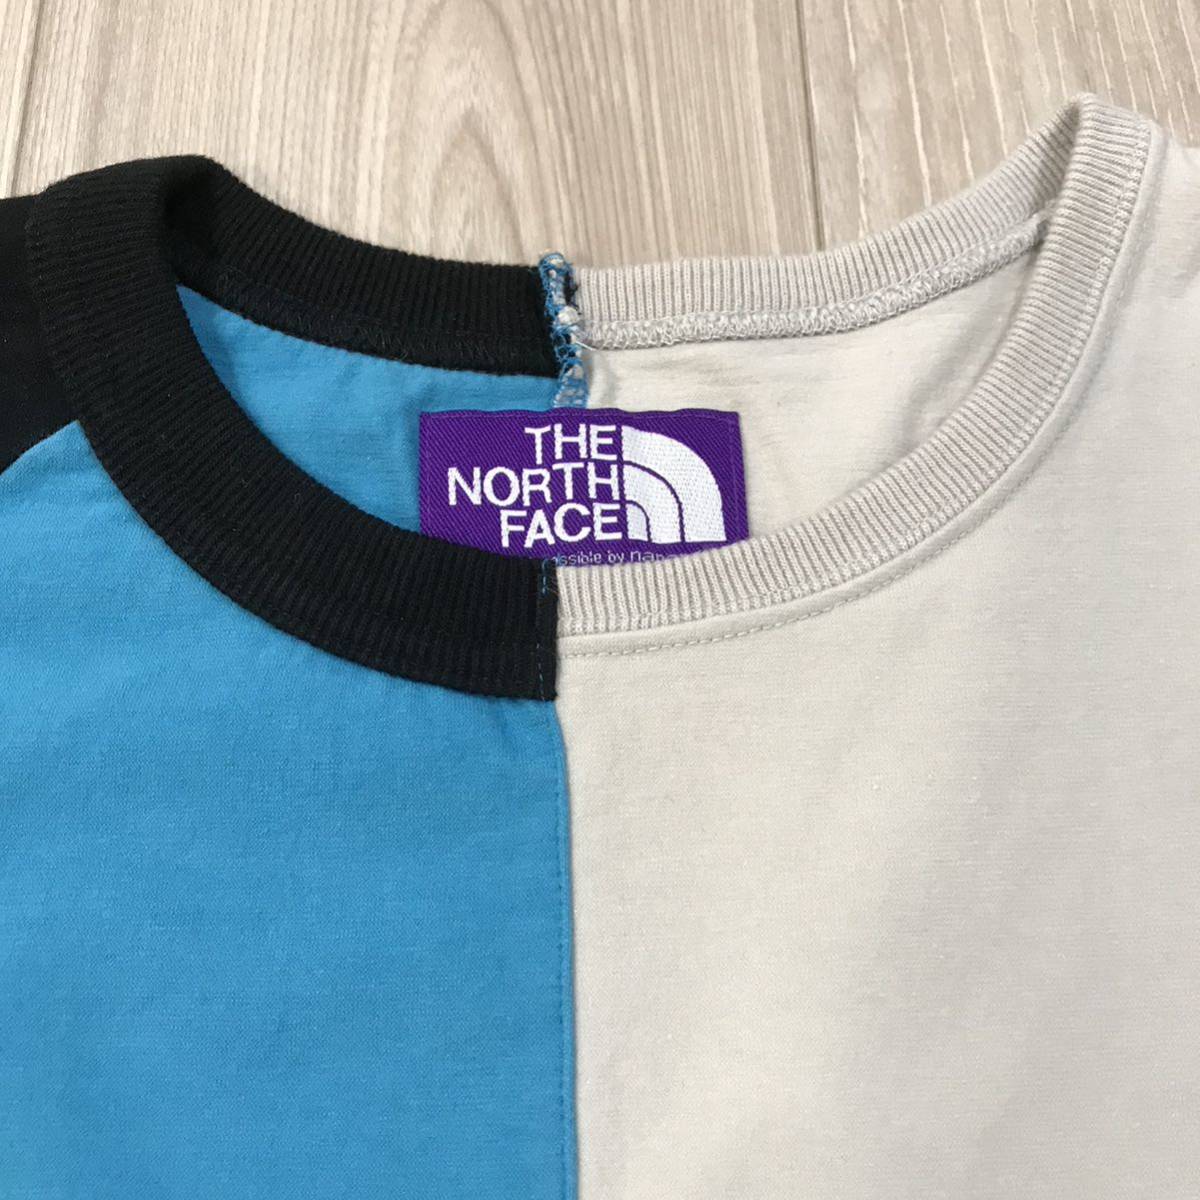 THE NORTH FACE High Bulky Jersey Teeノースフェイス パープル